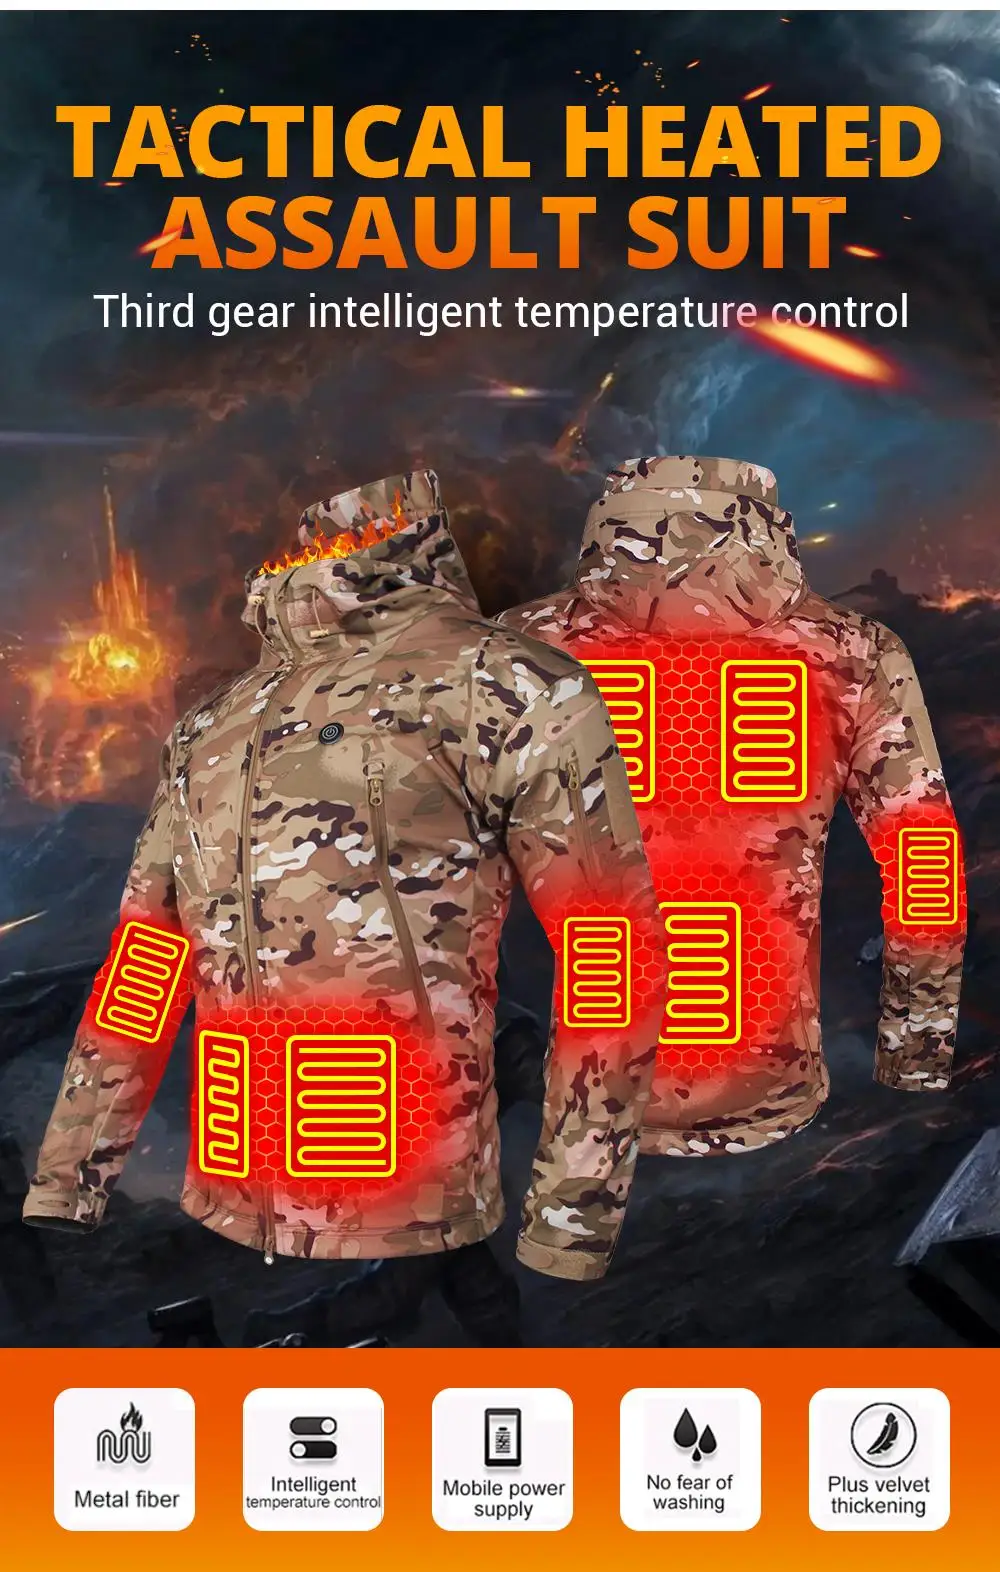 Ultra-thin heating panels embedded in a smart heated jacket with pocket temperature controls.